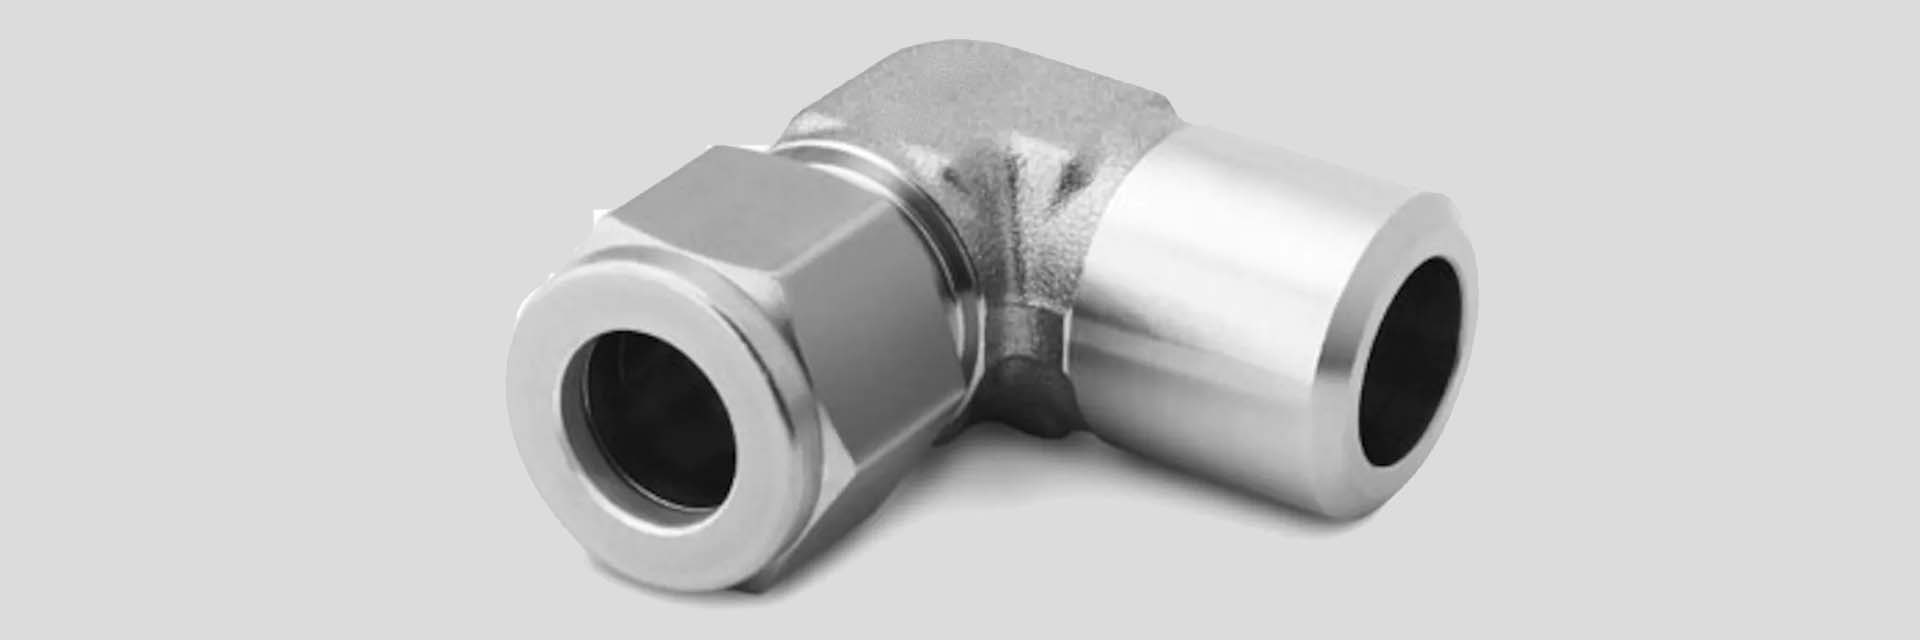 Male Pipe Weld Elbow